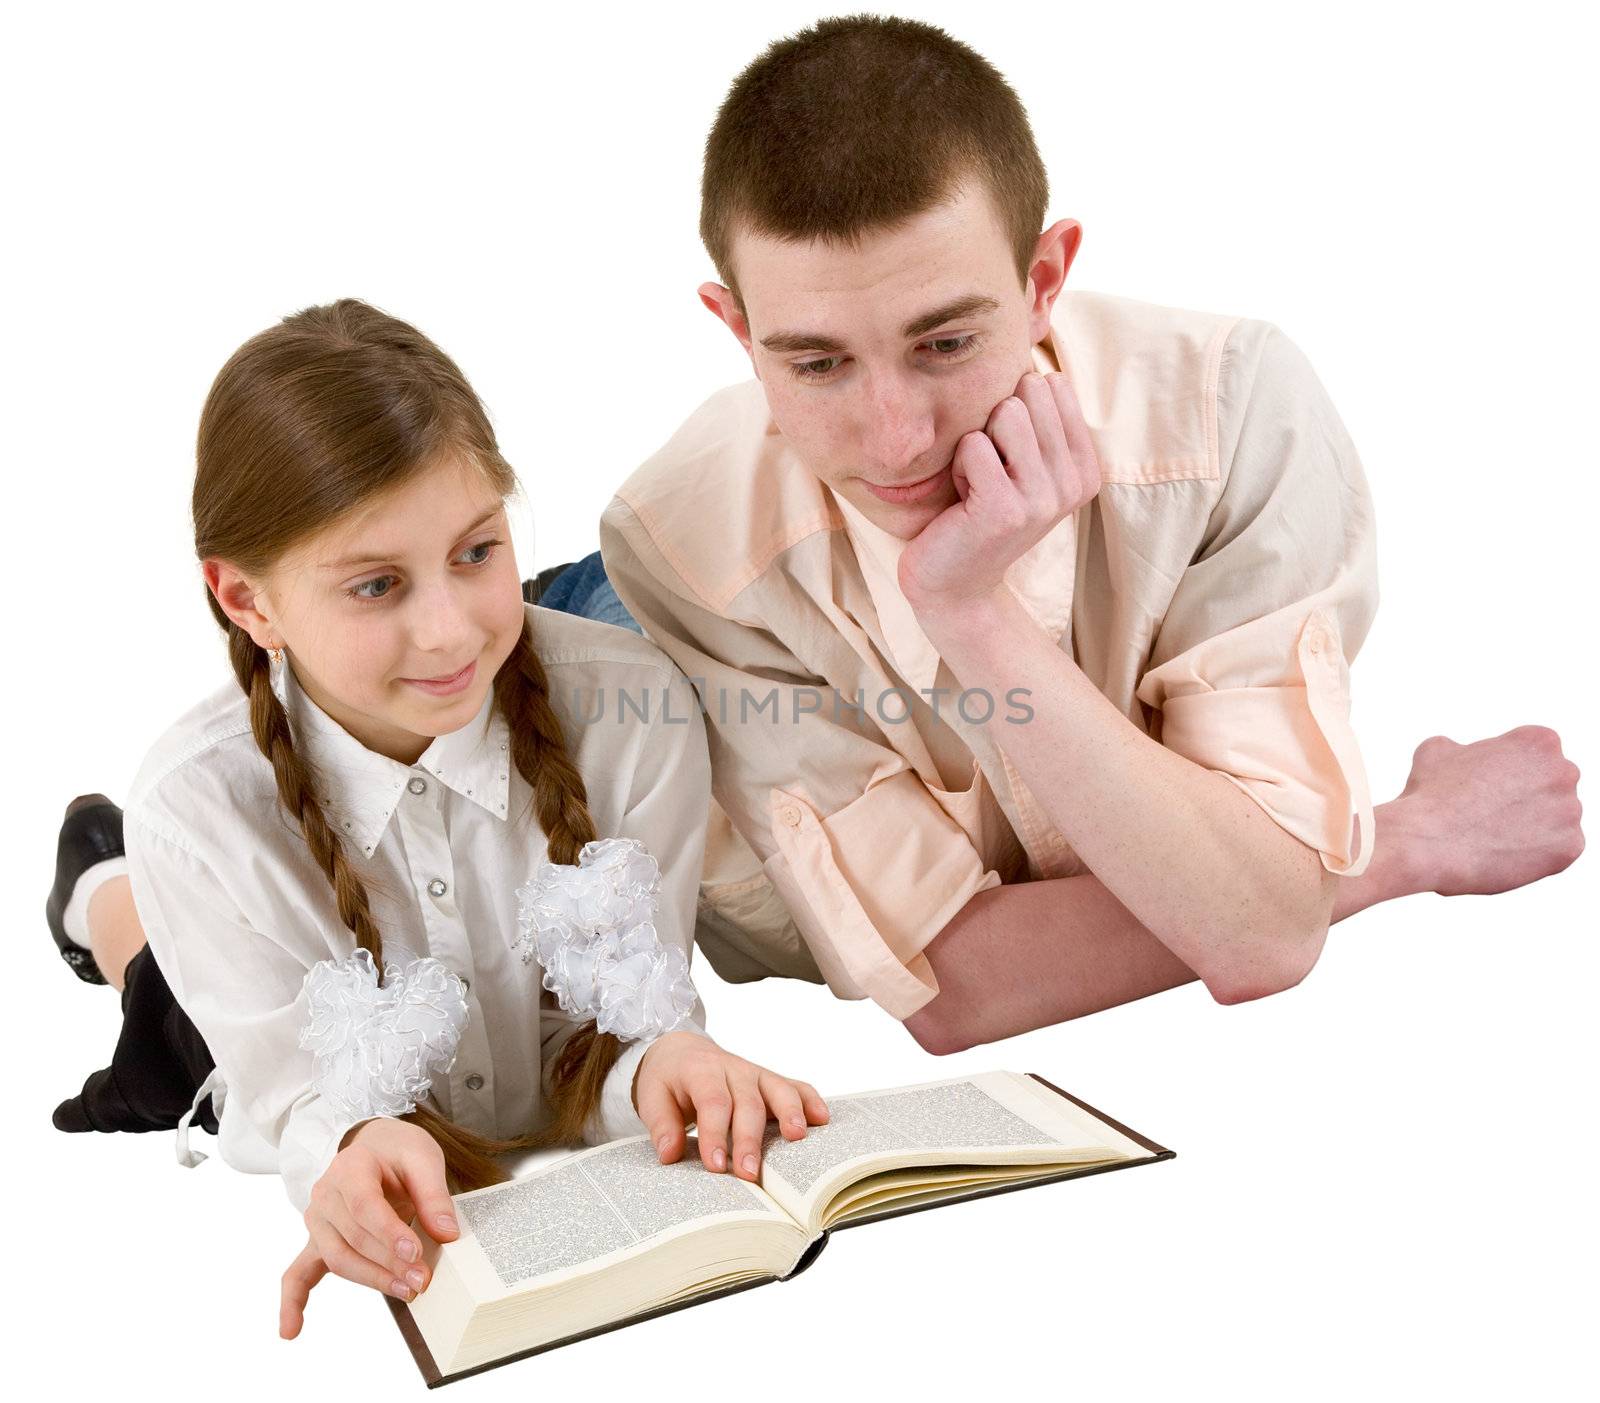 Girl and young man reading book in a reclining position on white